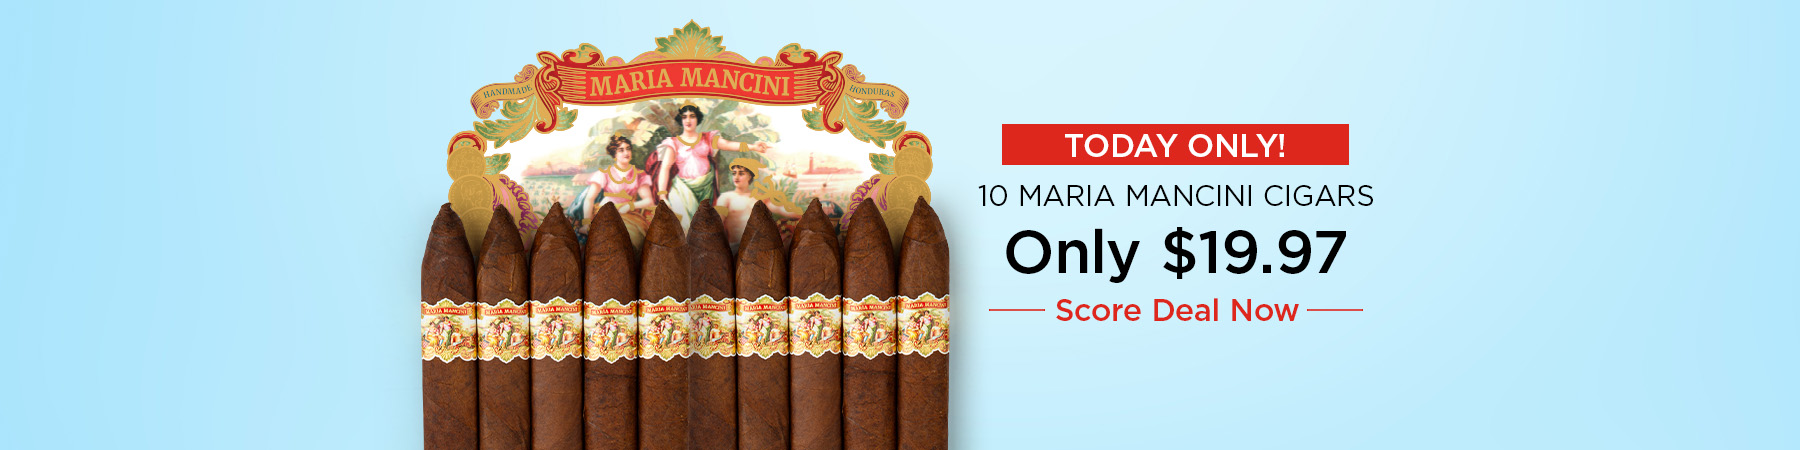 10 Maria Mancini Cigars Only $19.97